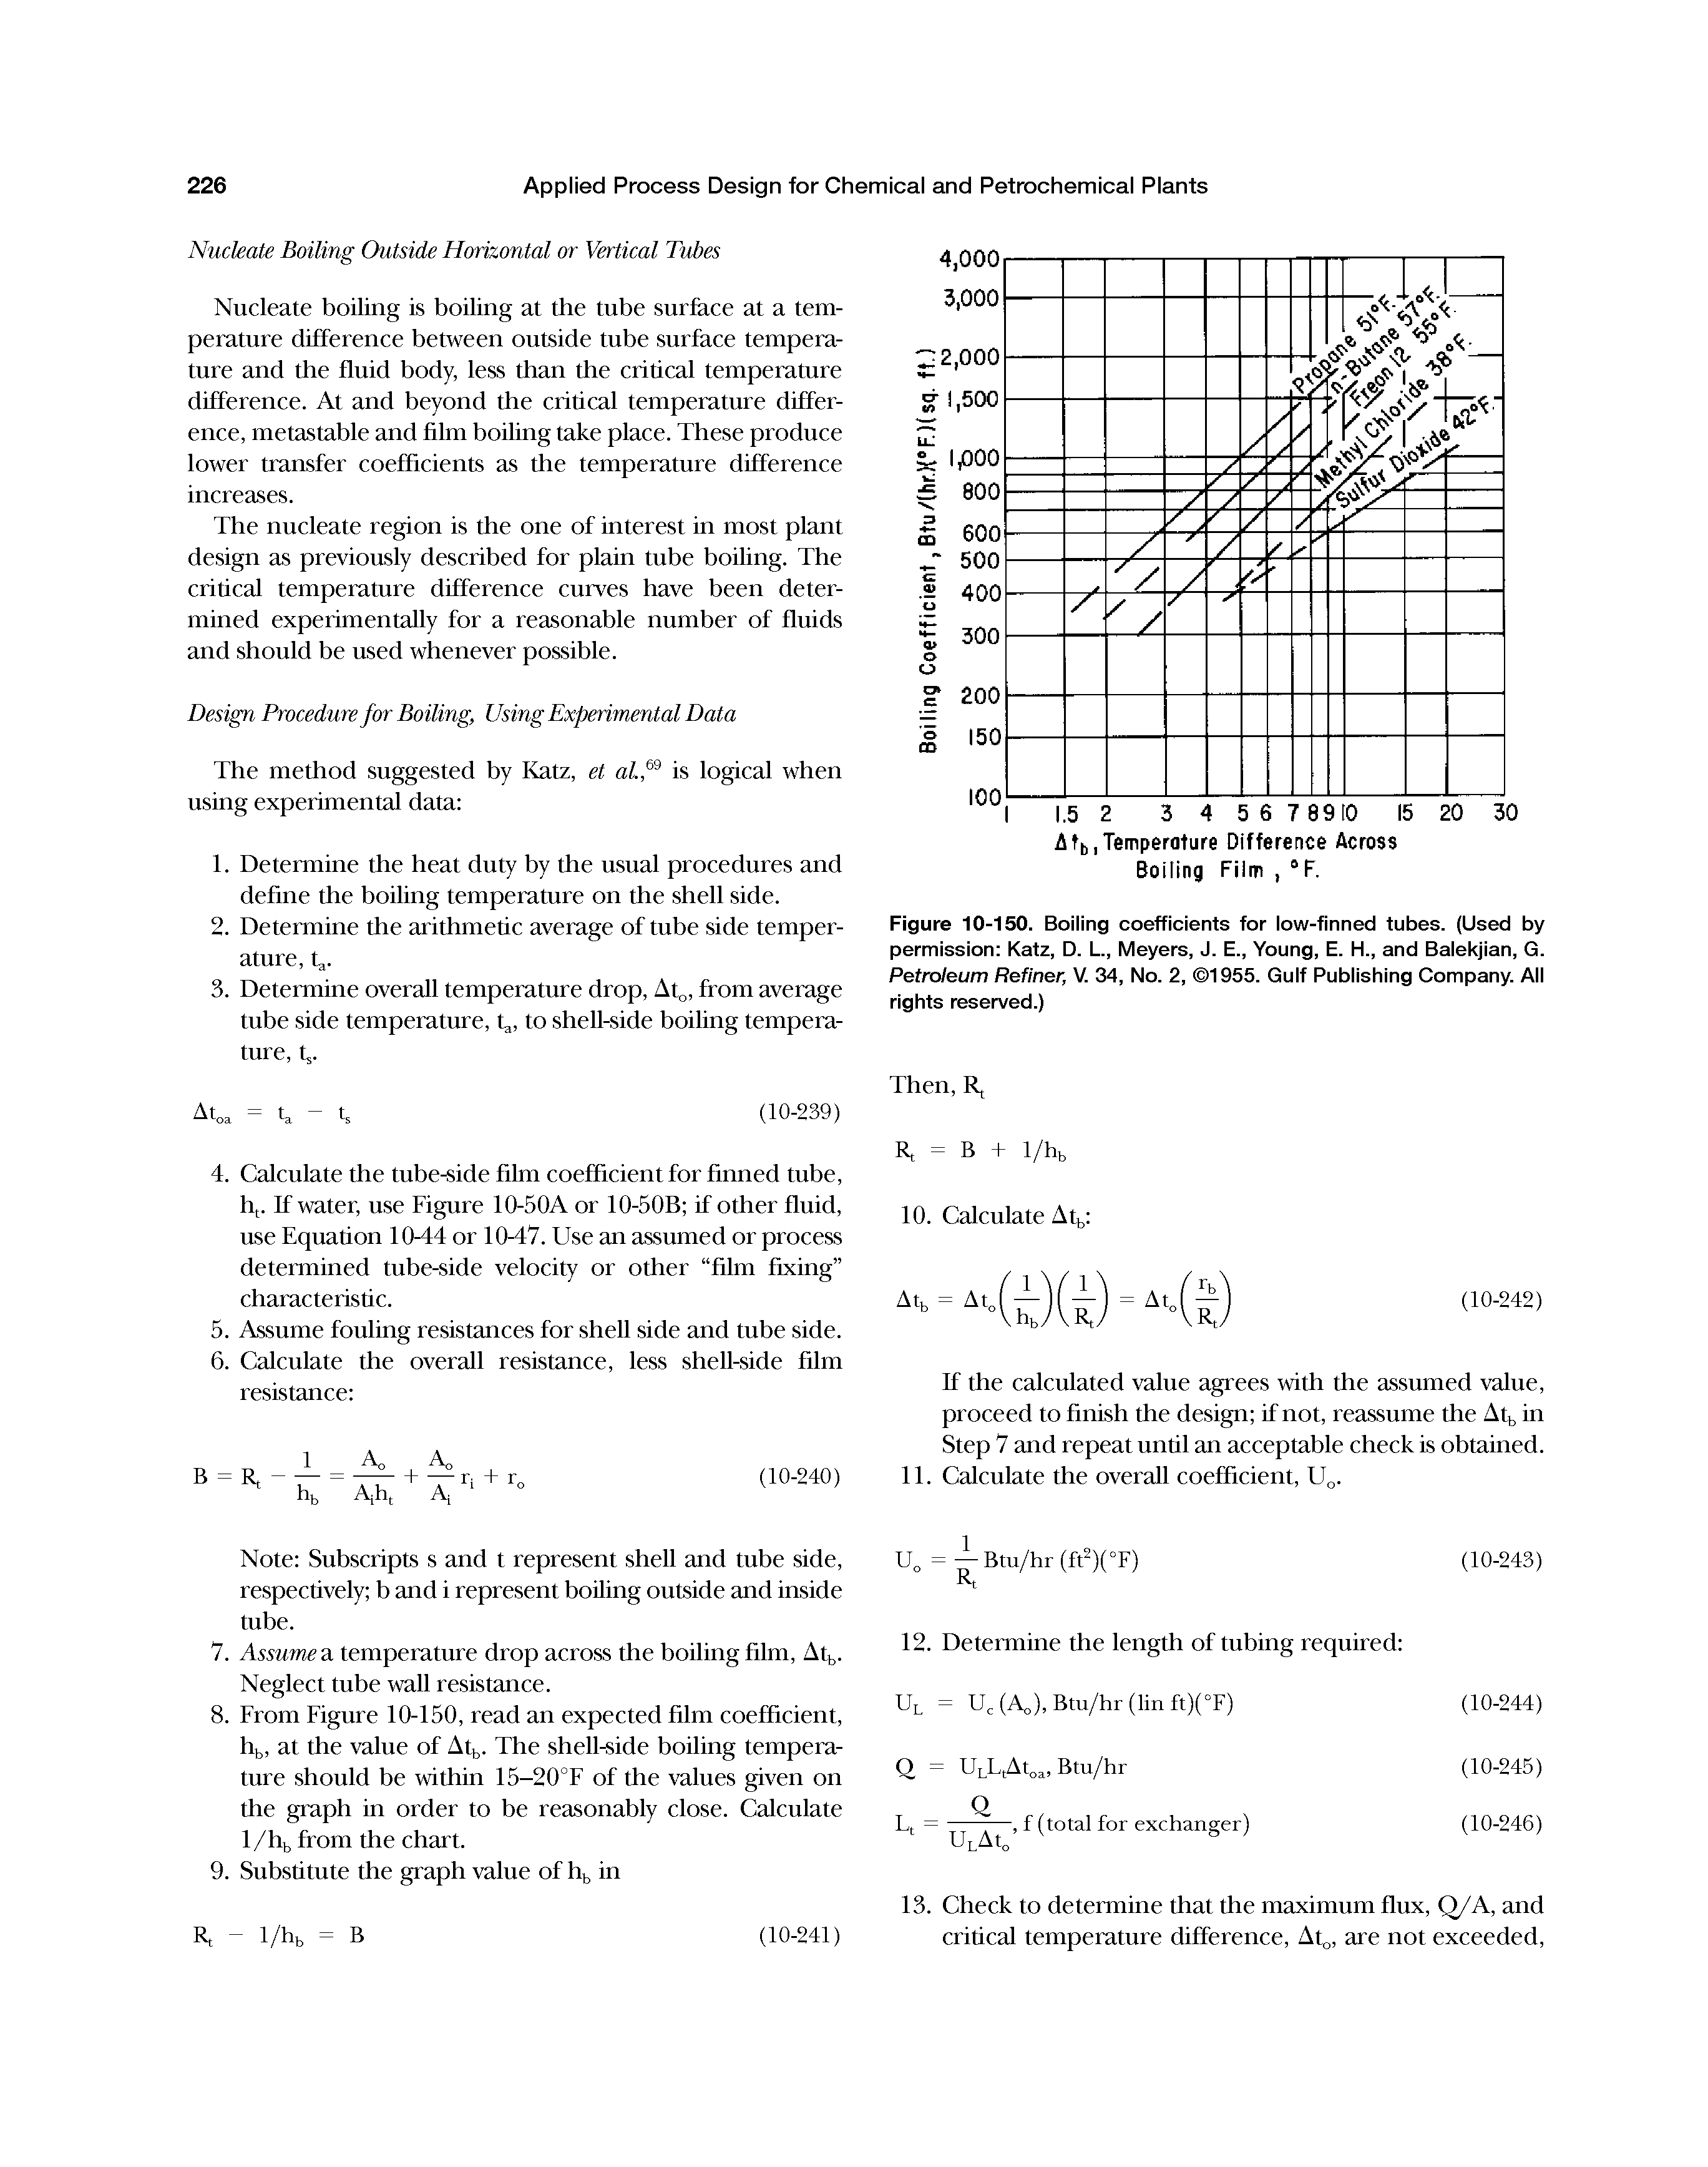 Figure 10-150. Boiling coefficients for low-finned tubes. (Used by permission Katz, D. L, Meyers, J. E., Young, E. H., and Balekjian, G. Petroleum Refiner, V. 34, No. 2, 1955. Gulf Publishing Company. All rights reserved.)...